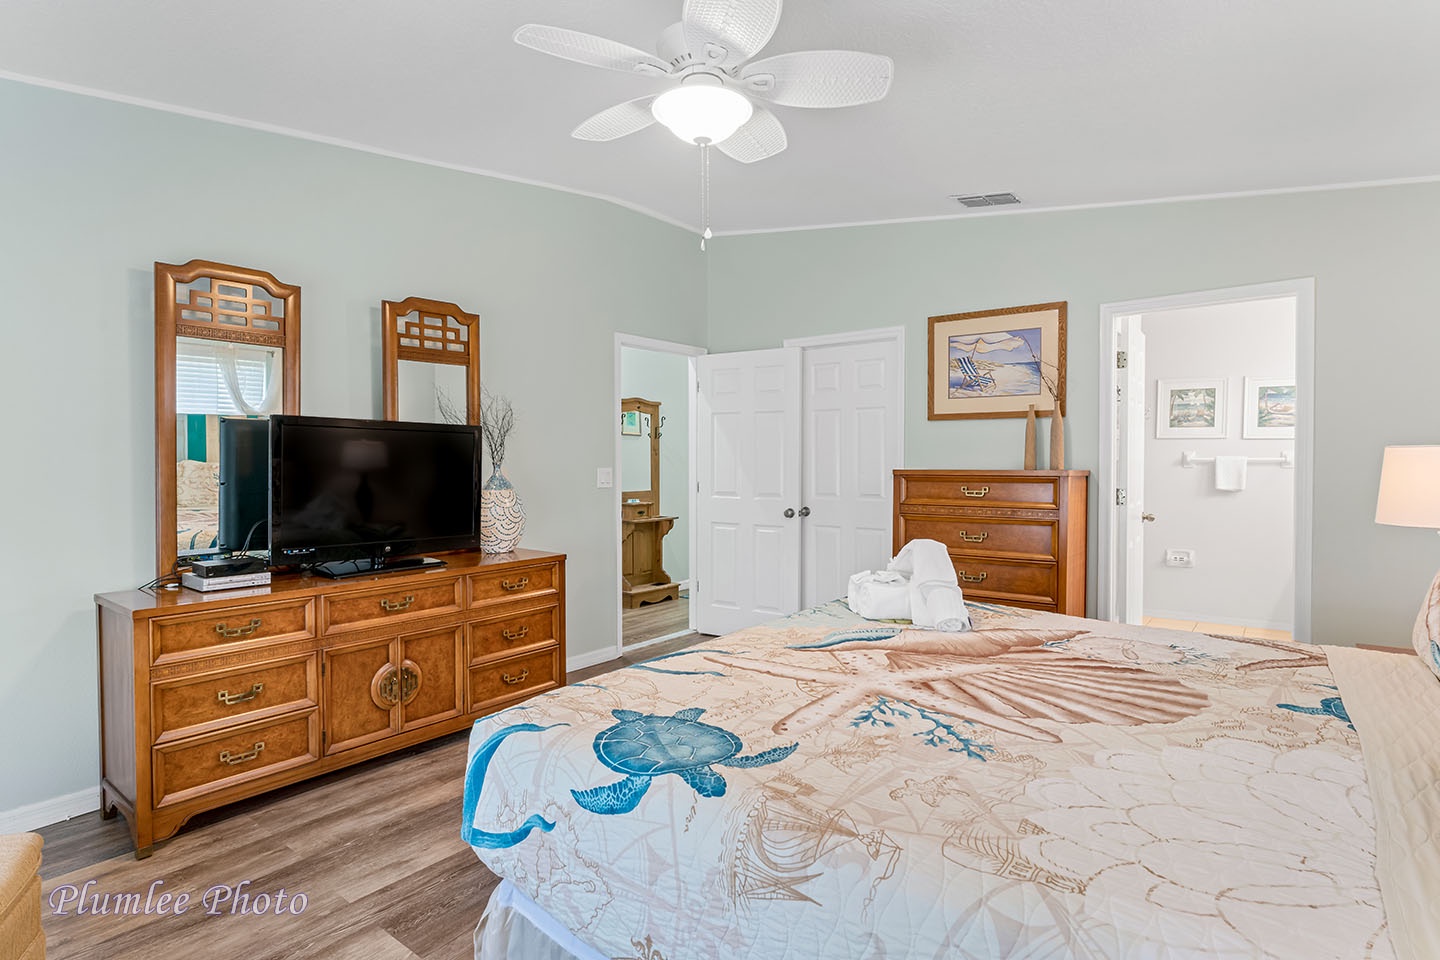 The Master Bedroom has a ceiling fan and smart TV.